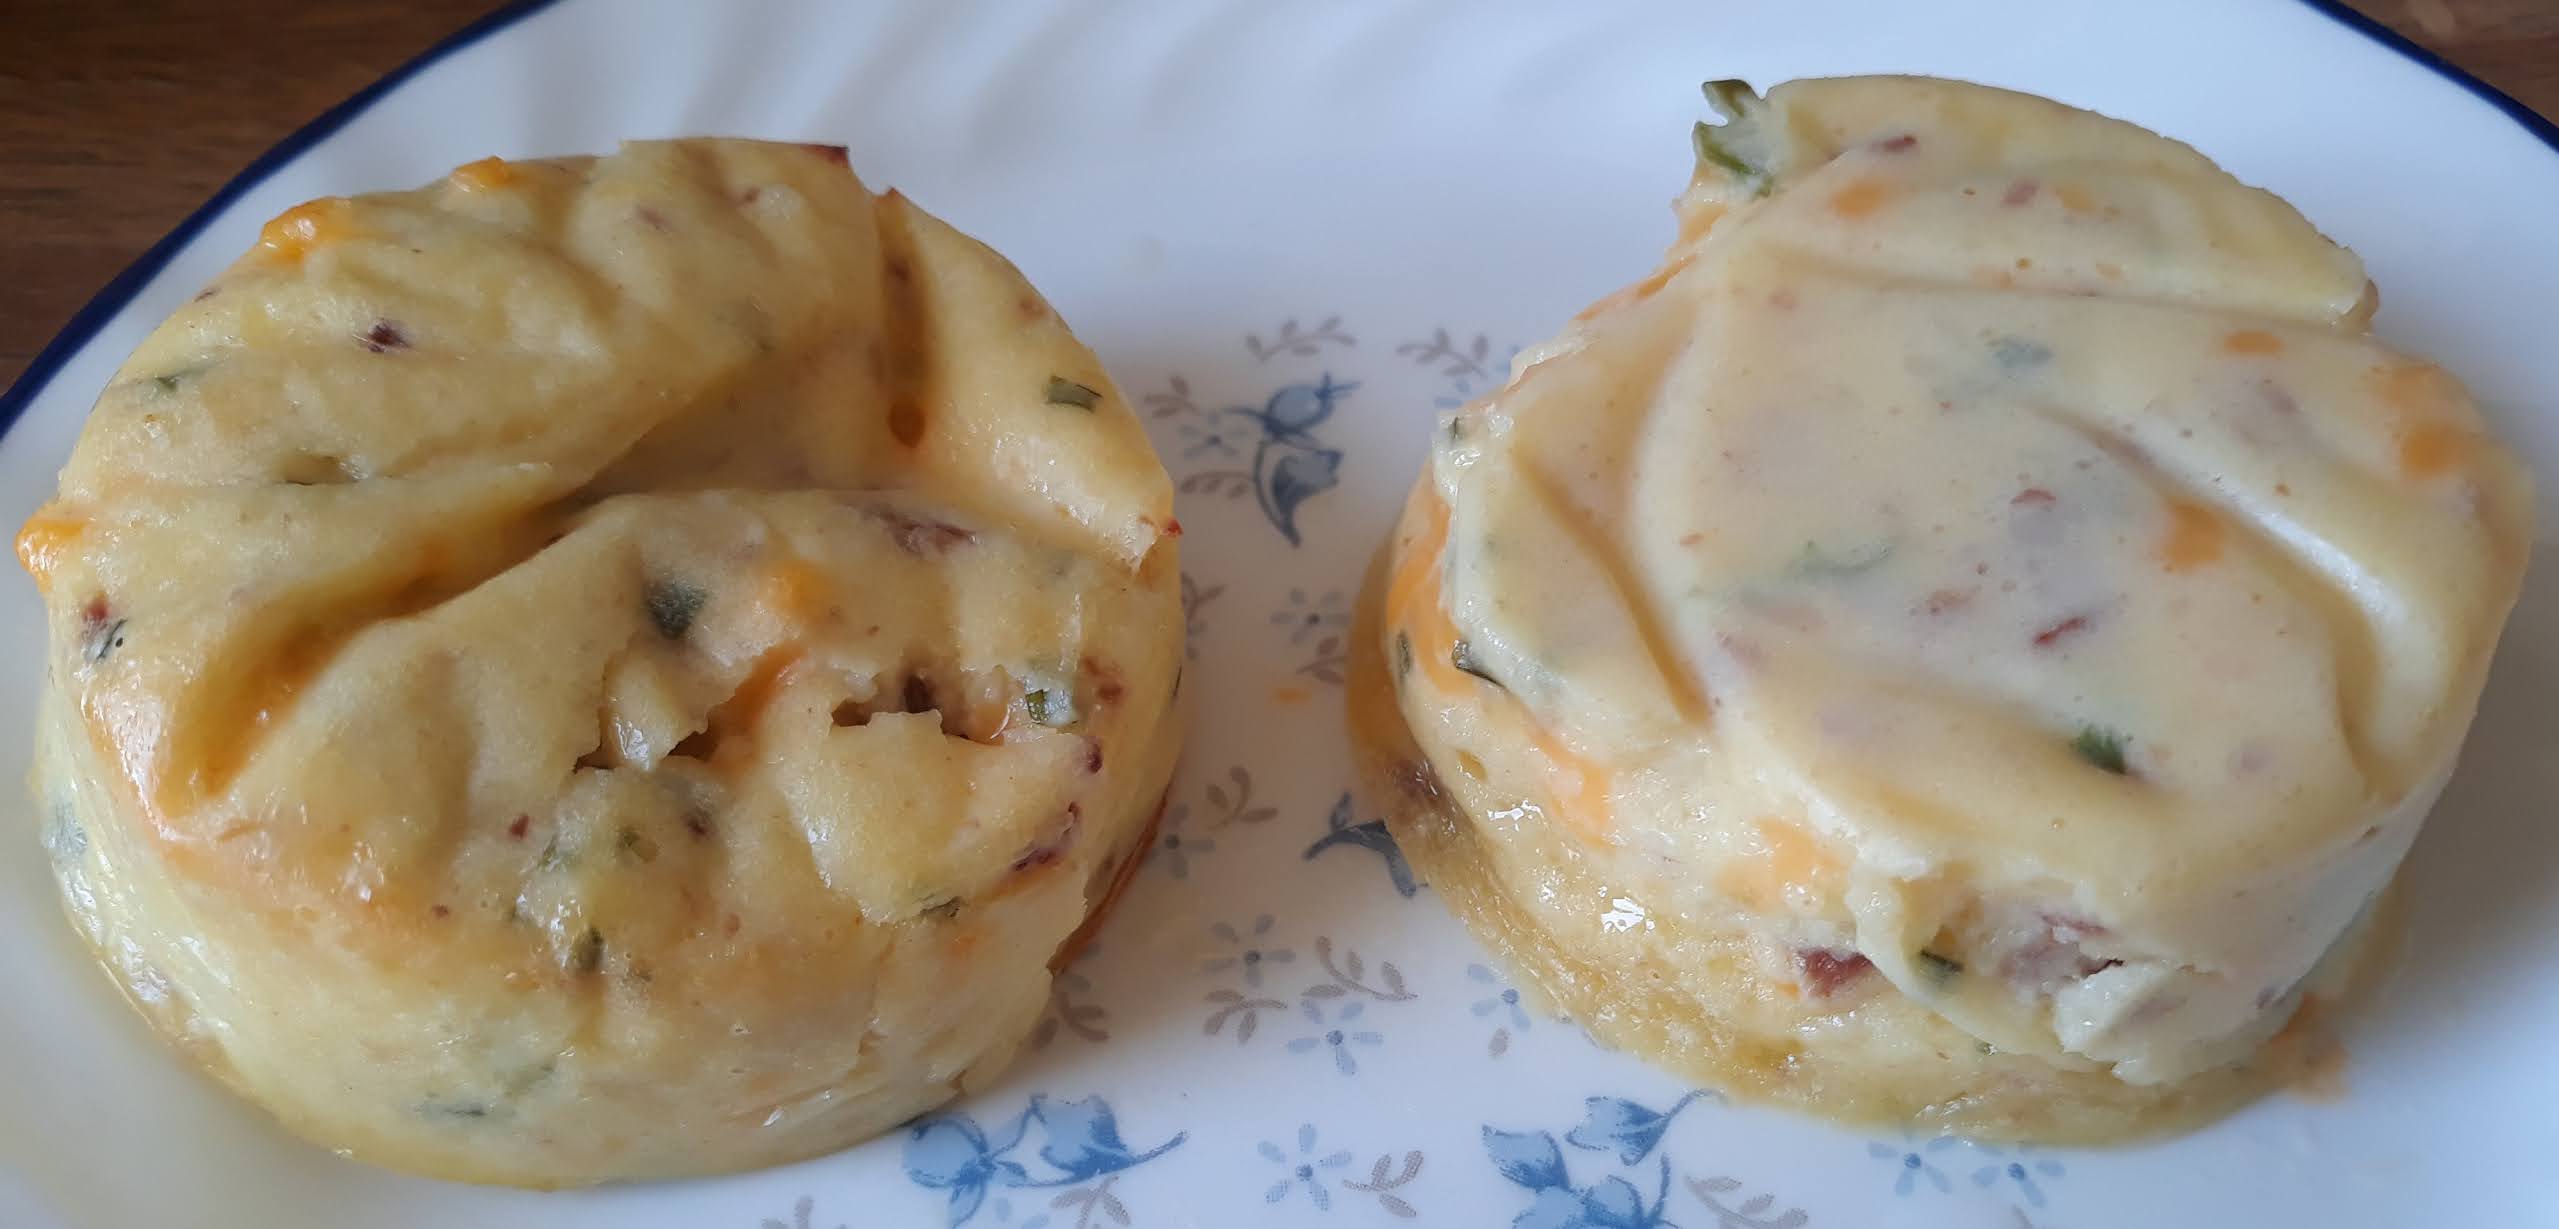 Trader Joe's Uncured Turkey Bacon and Cheese Sous Vide Egg Bites